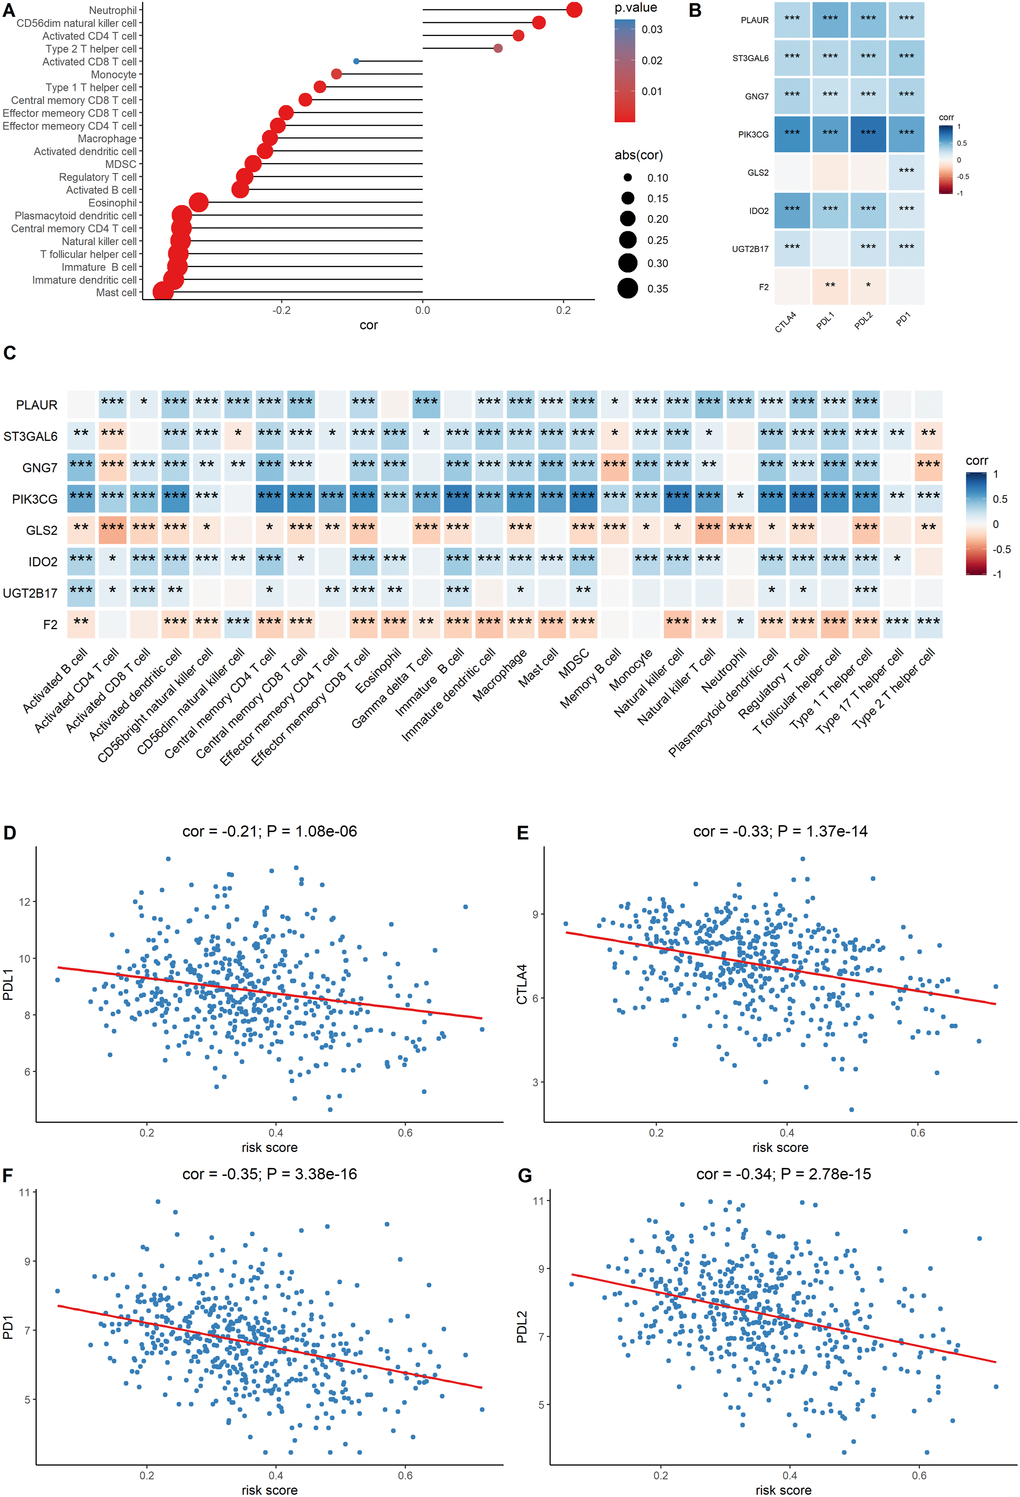 Evaluation of the correlation between the signature genes and immune characteristics. (A) Correlation between the risk score and immune cell infiltration score. (B) Correlation between the expression level of immune markers and the eight signature genes. (C) Correlation between each signature gene of the model and each immune cell type. (D–G) Correlation between the four immune checkpoint markers and the risk score.